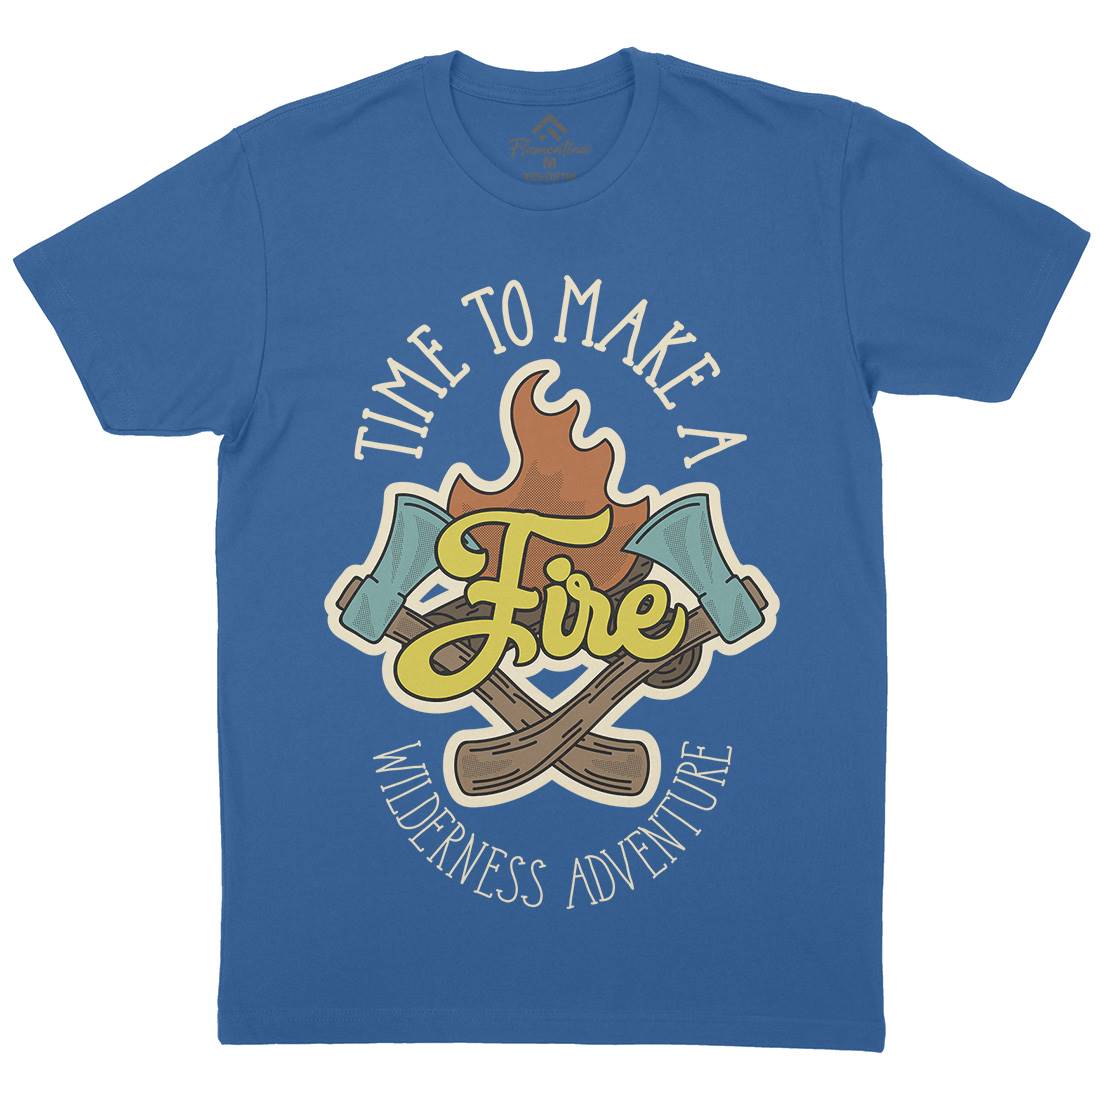 Time To Make Fire Mens Crew Neck T-Shirt Nature D992